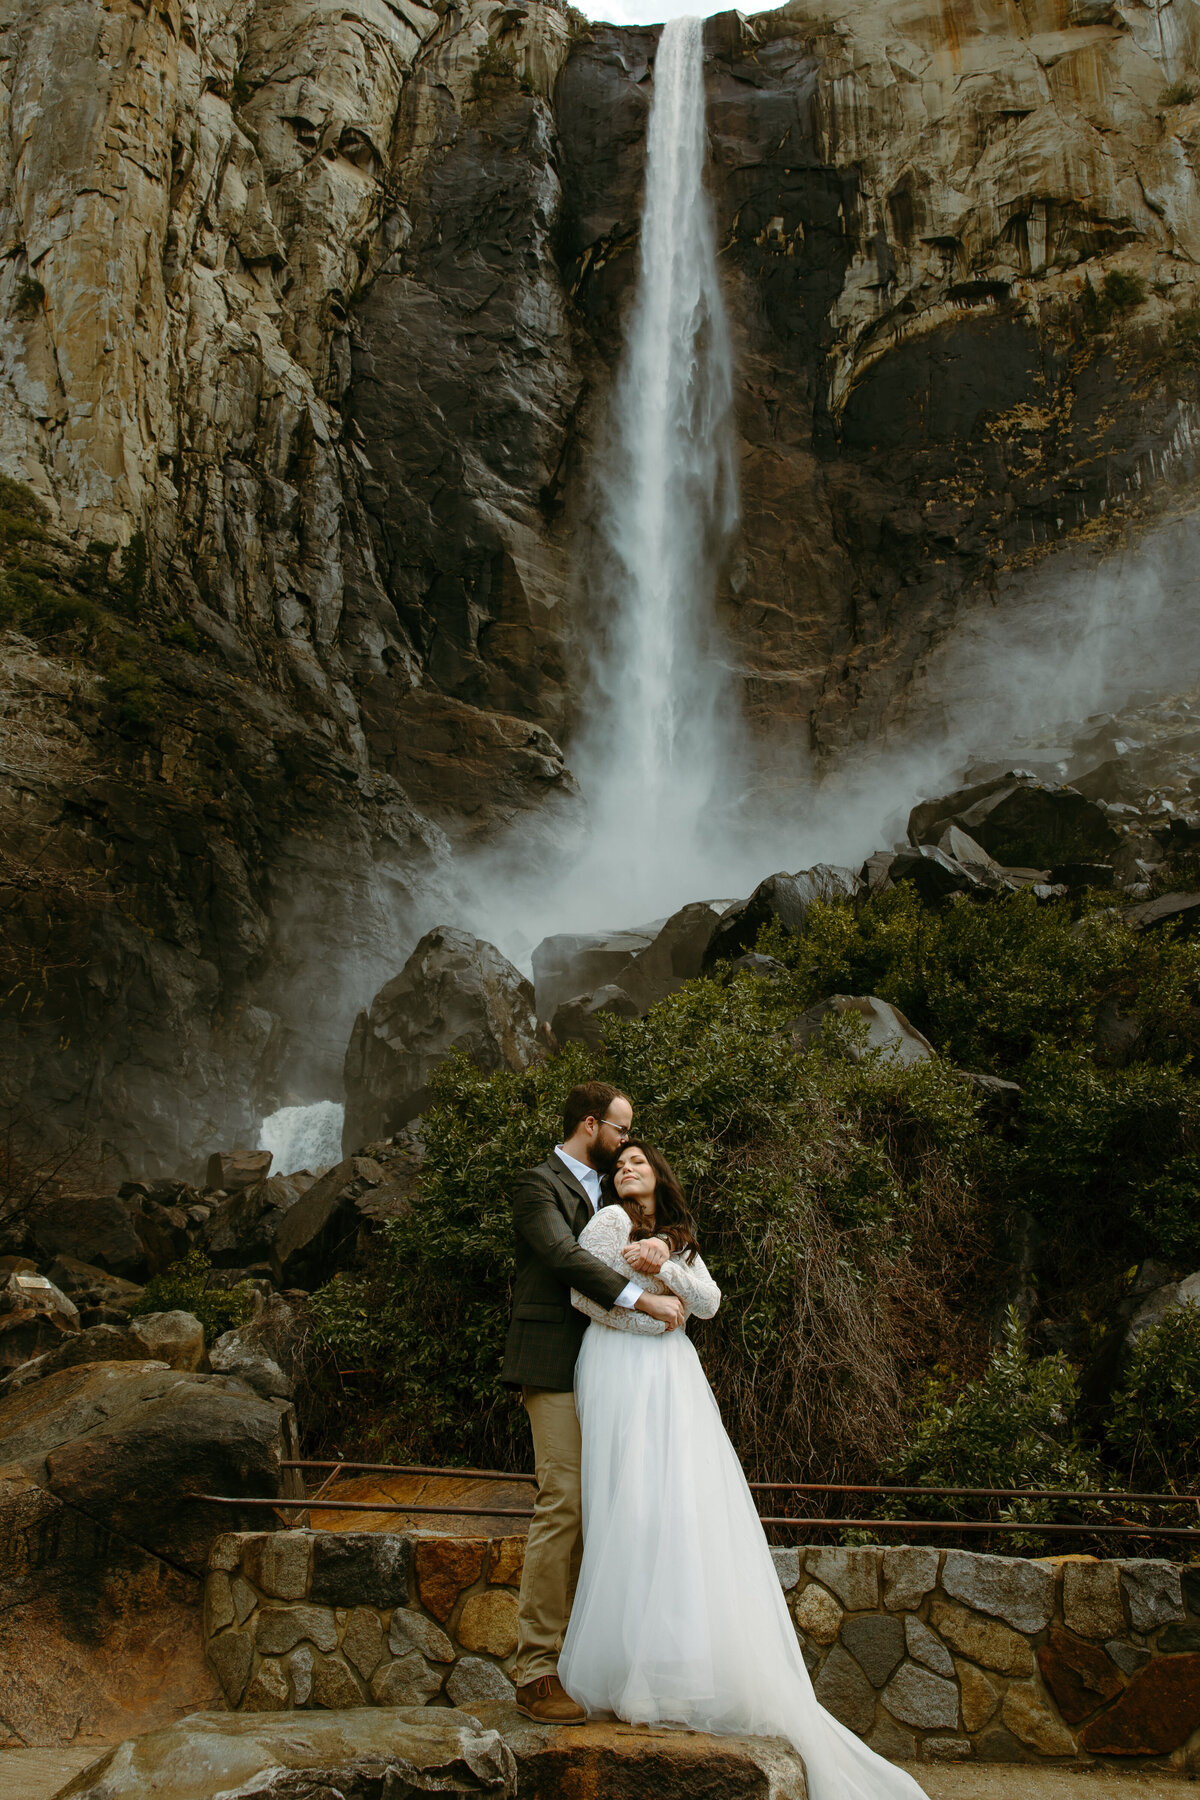 Groom holding his bride from behind and kissing her head  with a stunning waterfall in the background misting and hitting the rocks below.